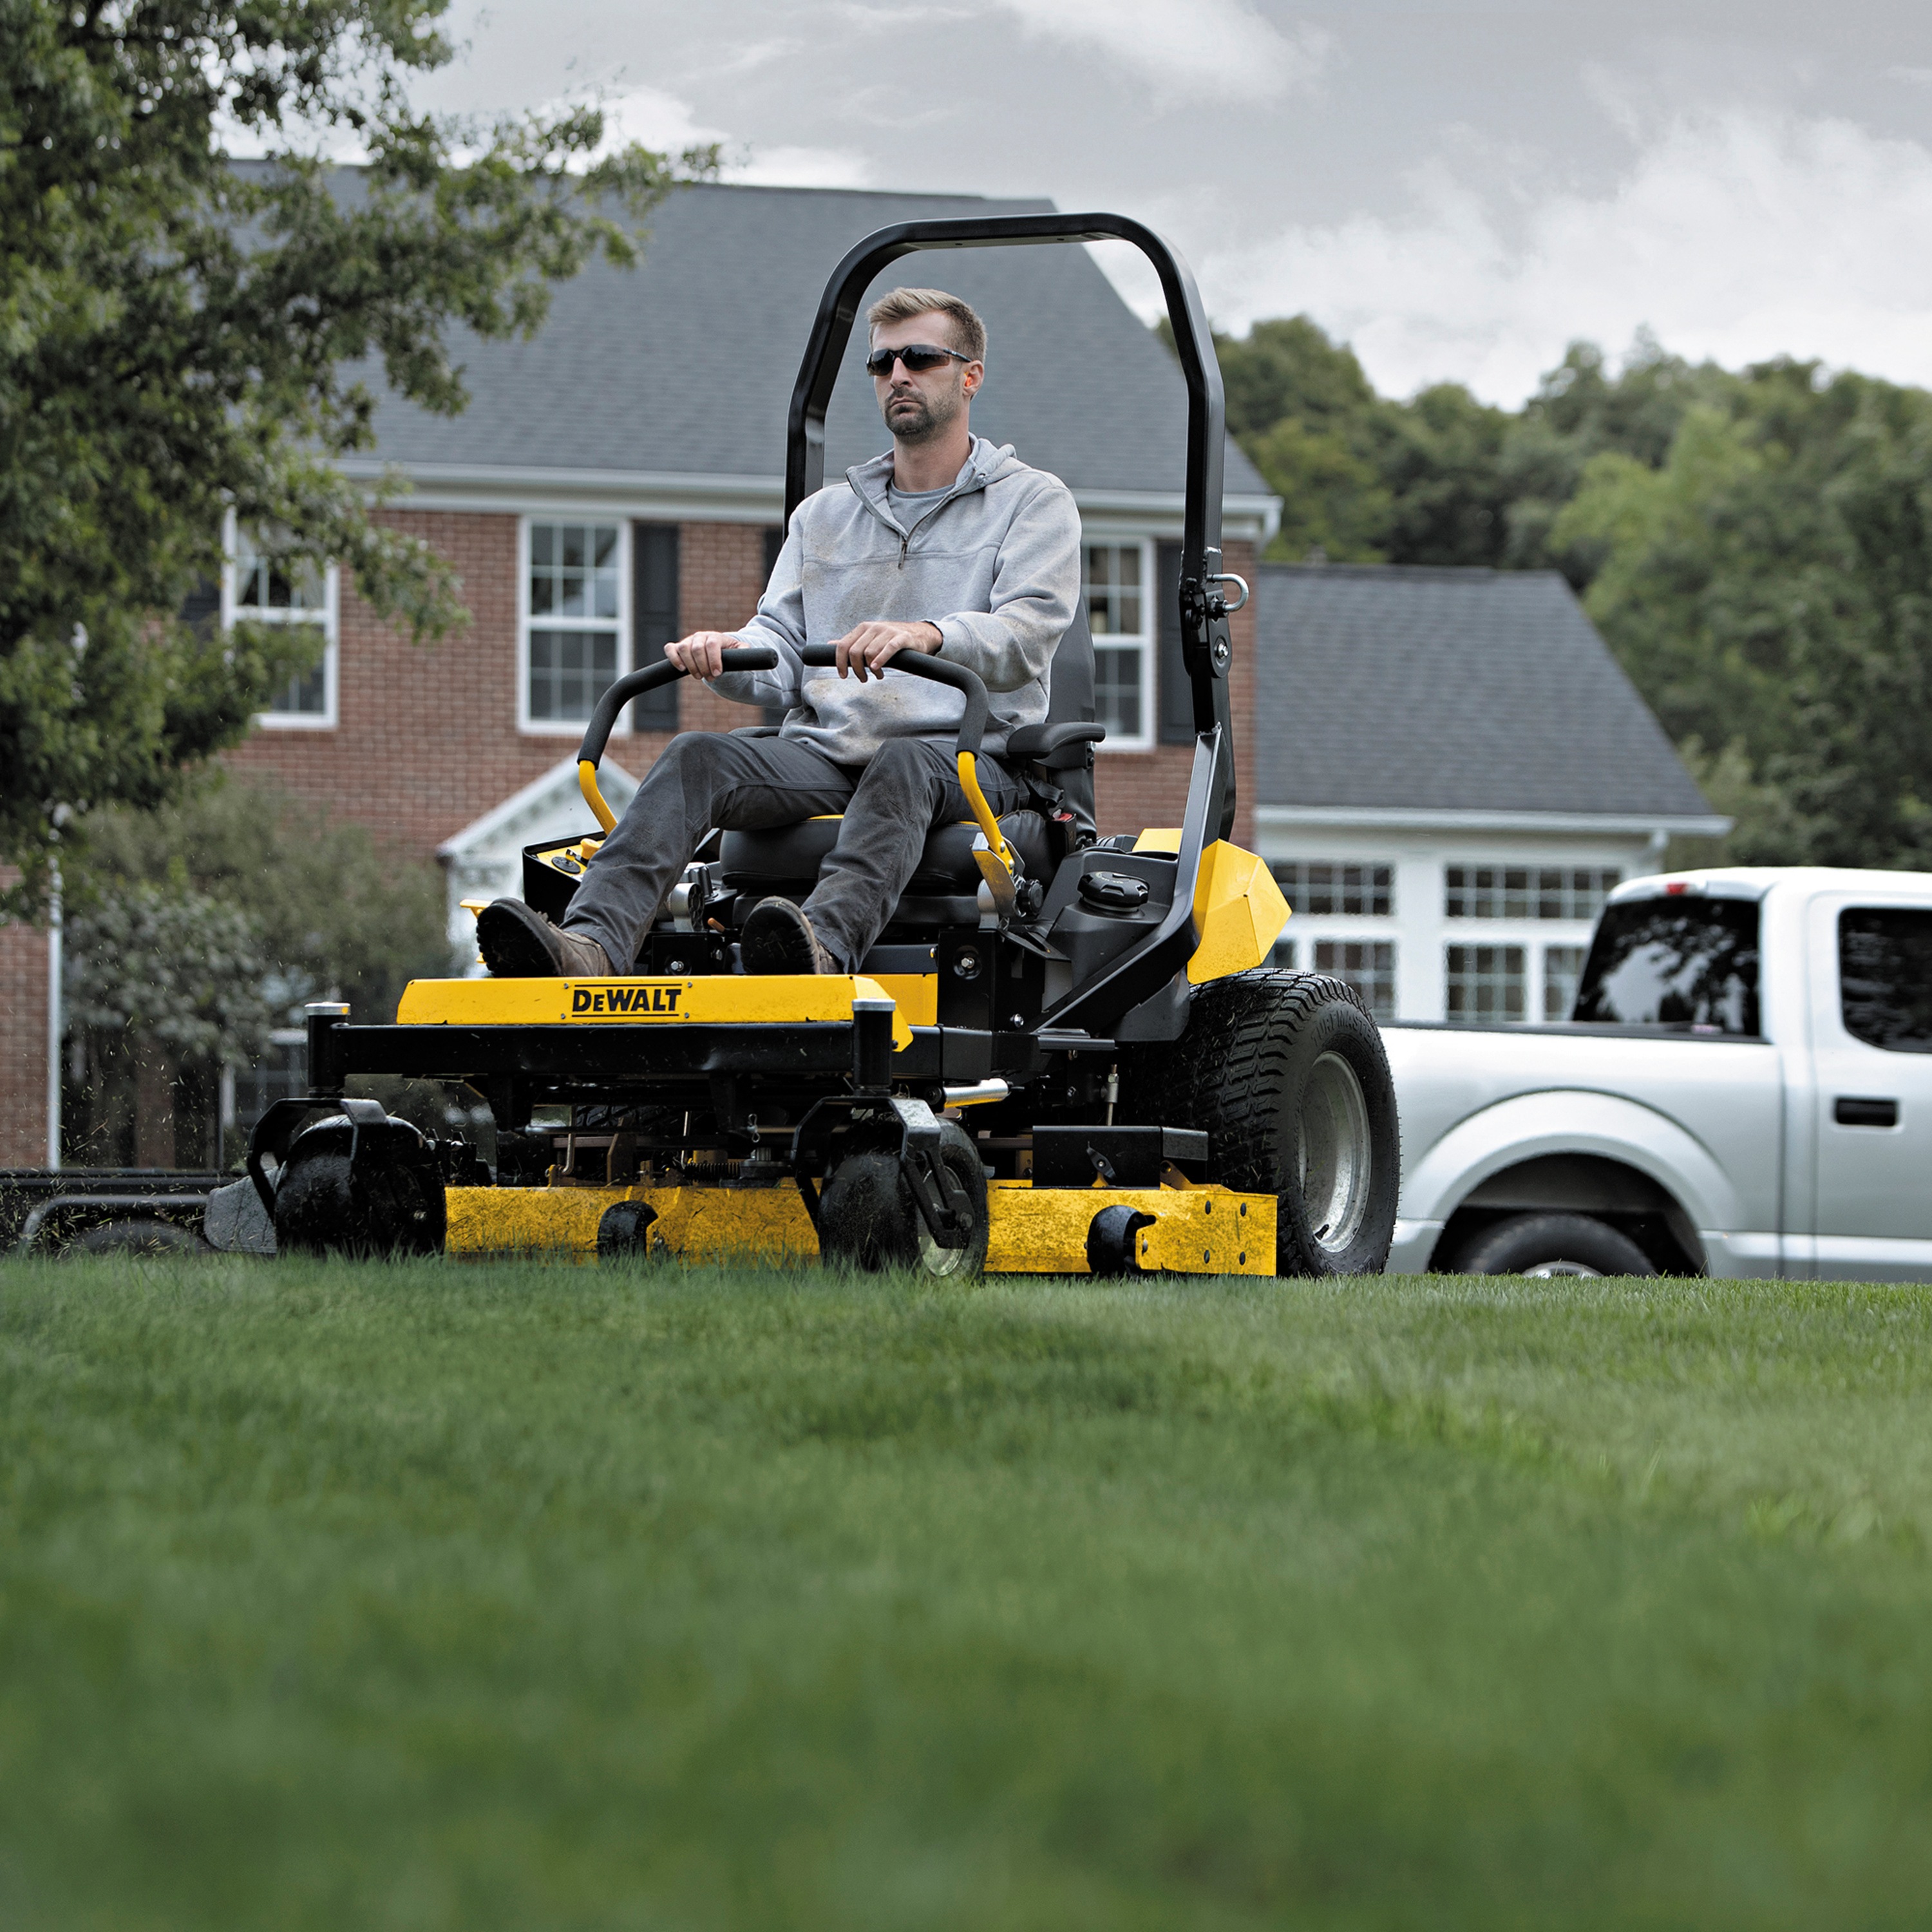 54 inch Kawasaki Gas Hydrostatic Commercial Zero Turn Mower being used by person to mow lawn outdoors. 